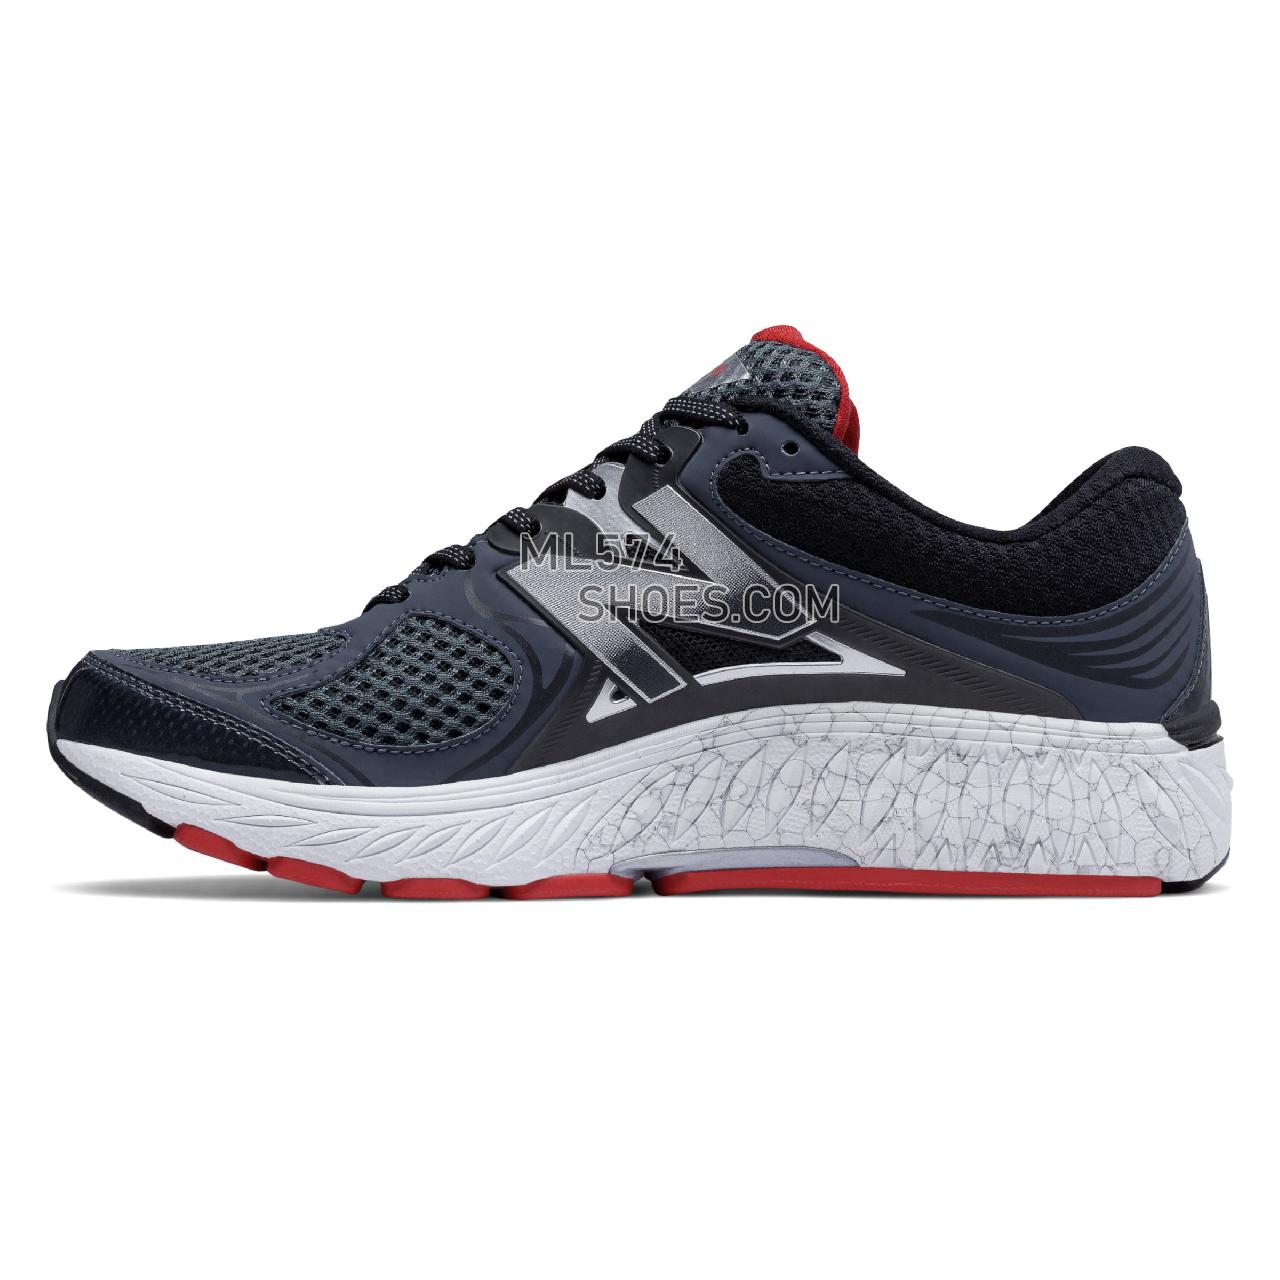 New Balance 940v3 - Men's 940 - Running Black with Red and Silver - M940BR3